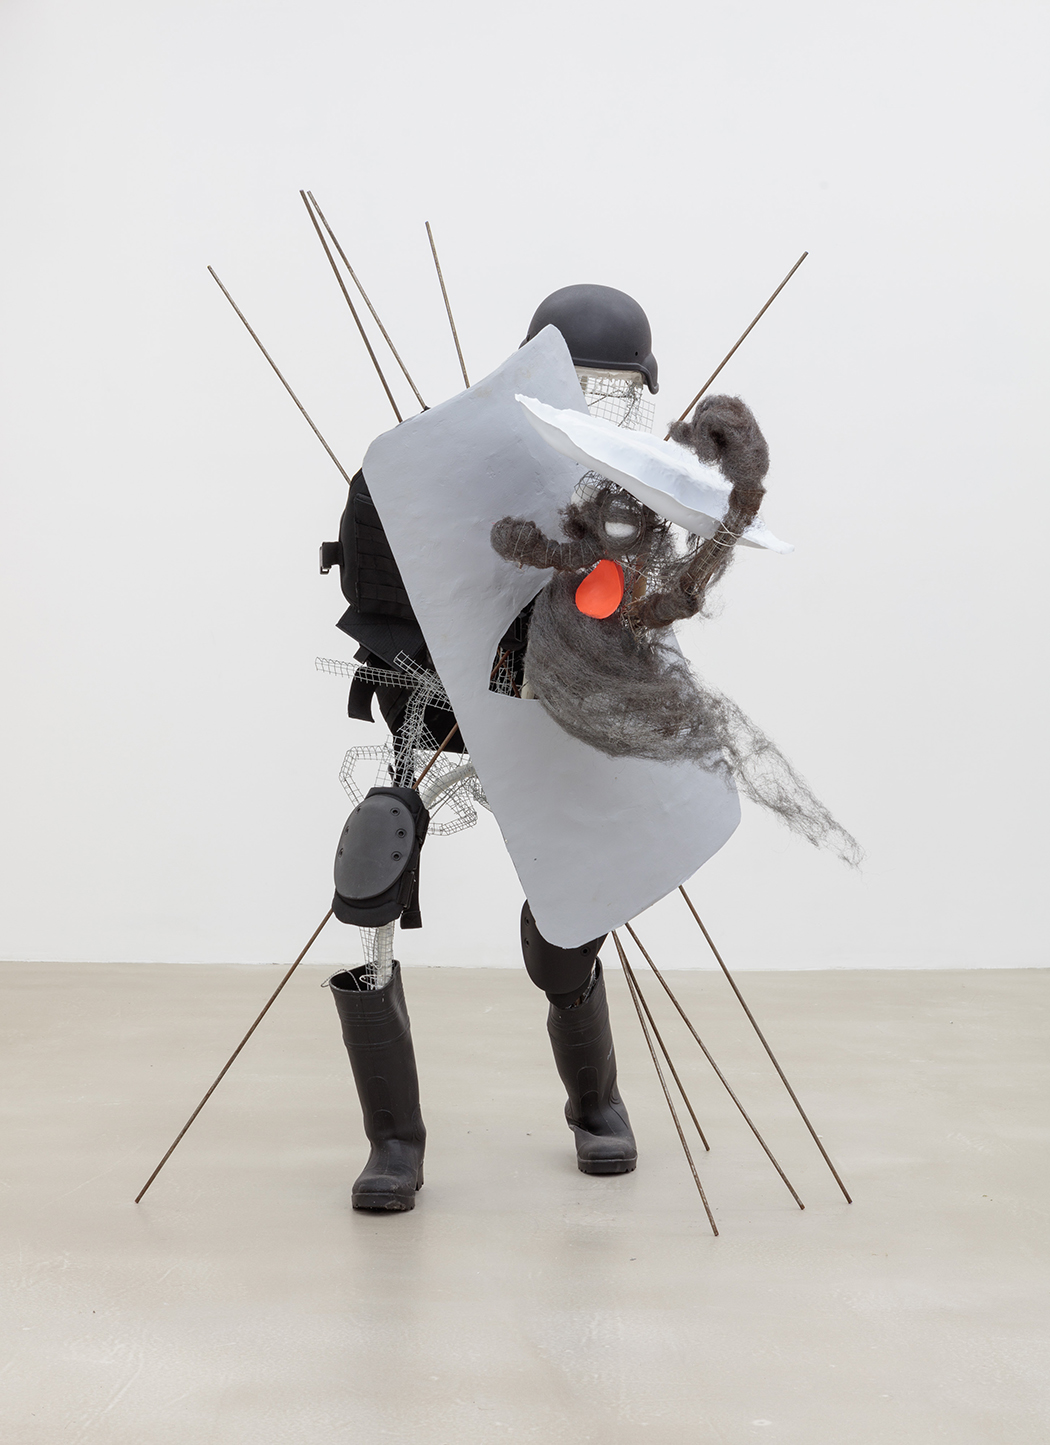 A sculpture using real riot gear and a steel wool figure that does not anatomically align with the riot gear.